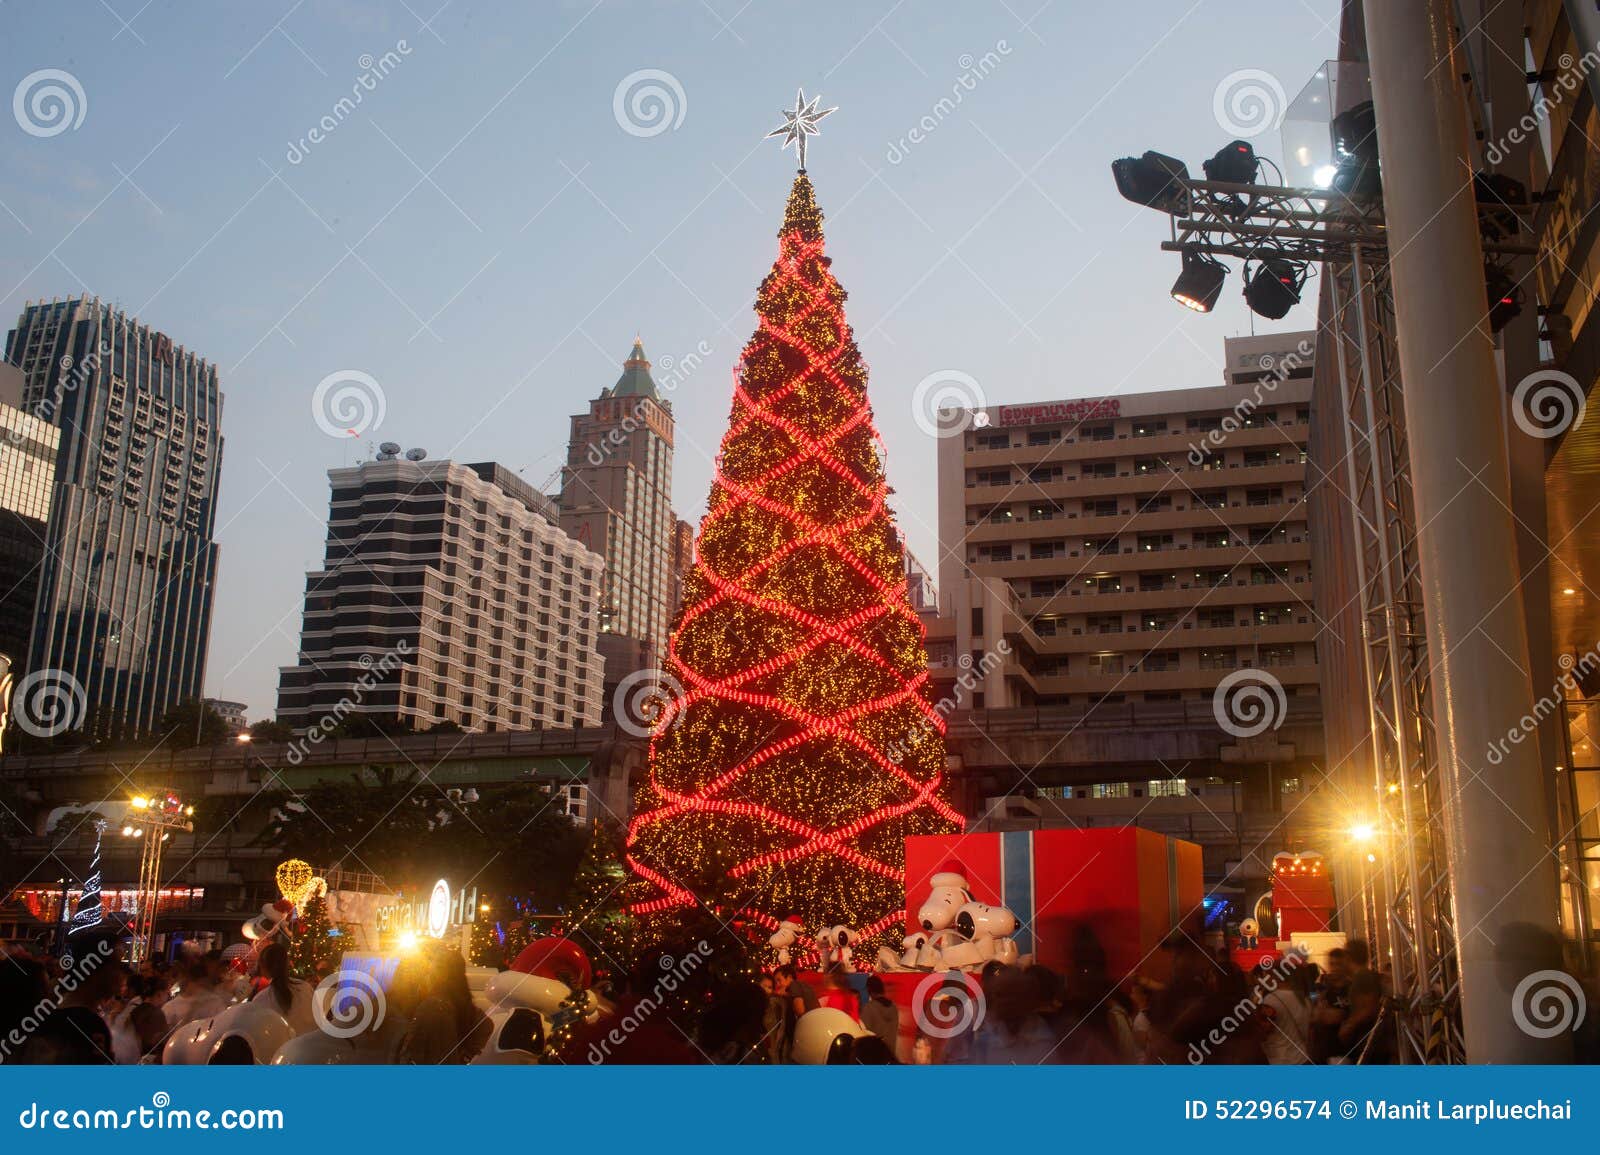 Bangkok Thailand Dec 30 2018 People On Christmas And Happy New